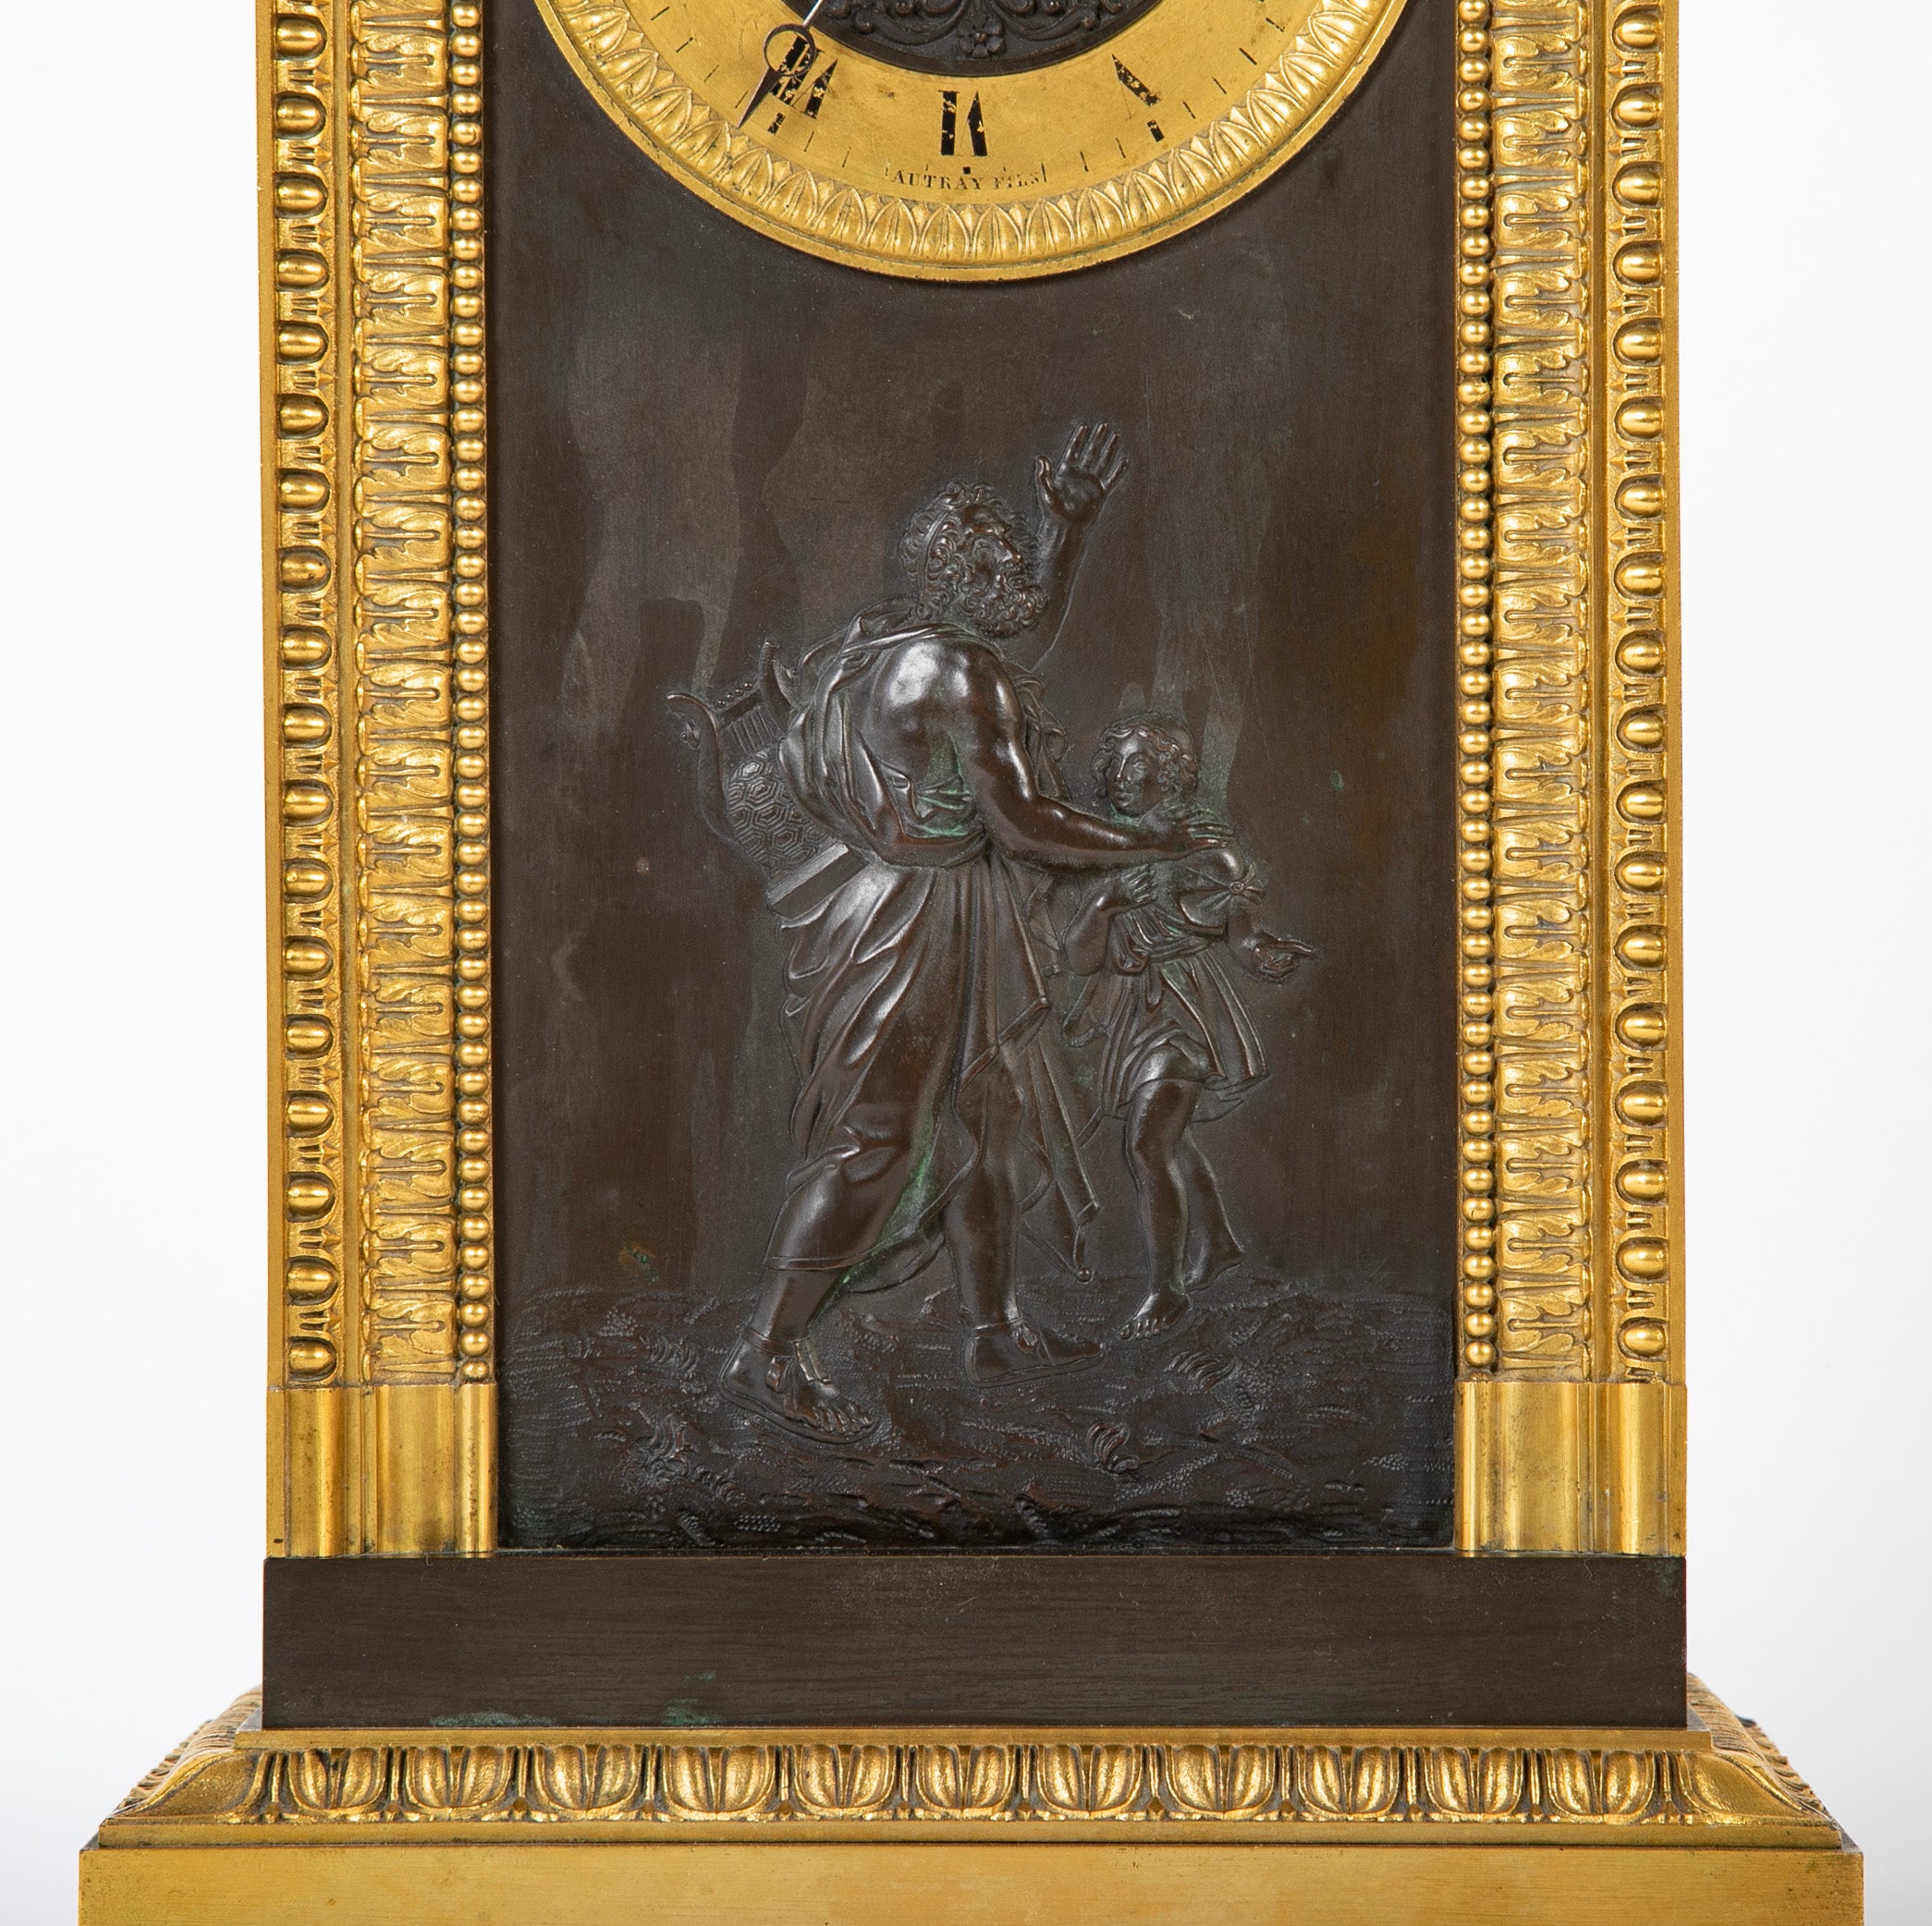 An Early 18th Century French Empire Clock in the Manner of Feuchere and Fossey